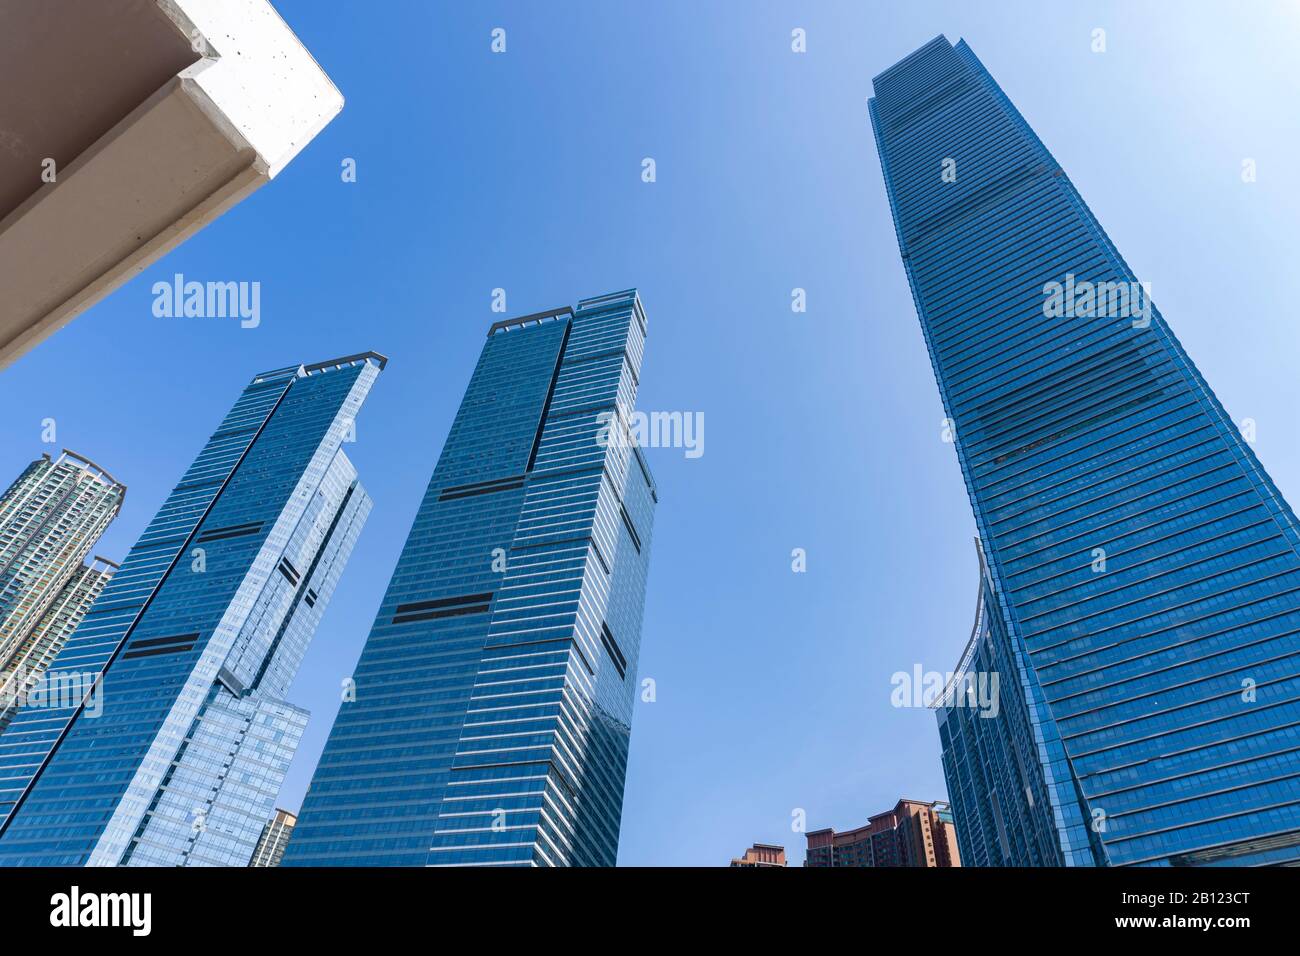 Hong Kong - January 11 2020 : Dutch Angle View of International Commerce Centre located in West Kowloon Stock Photo